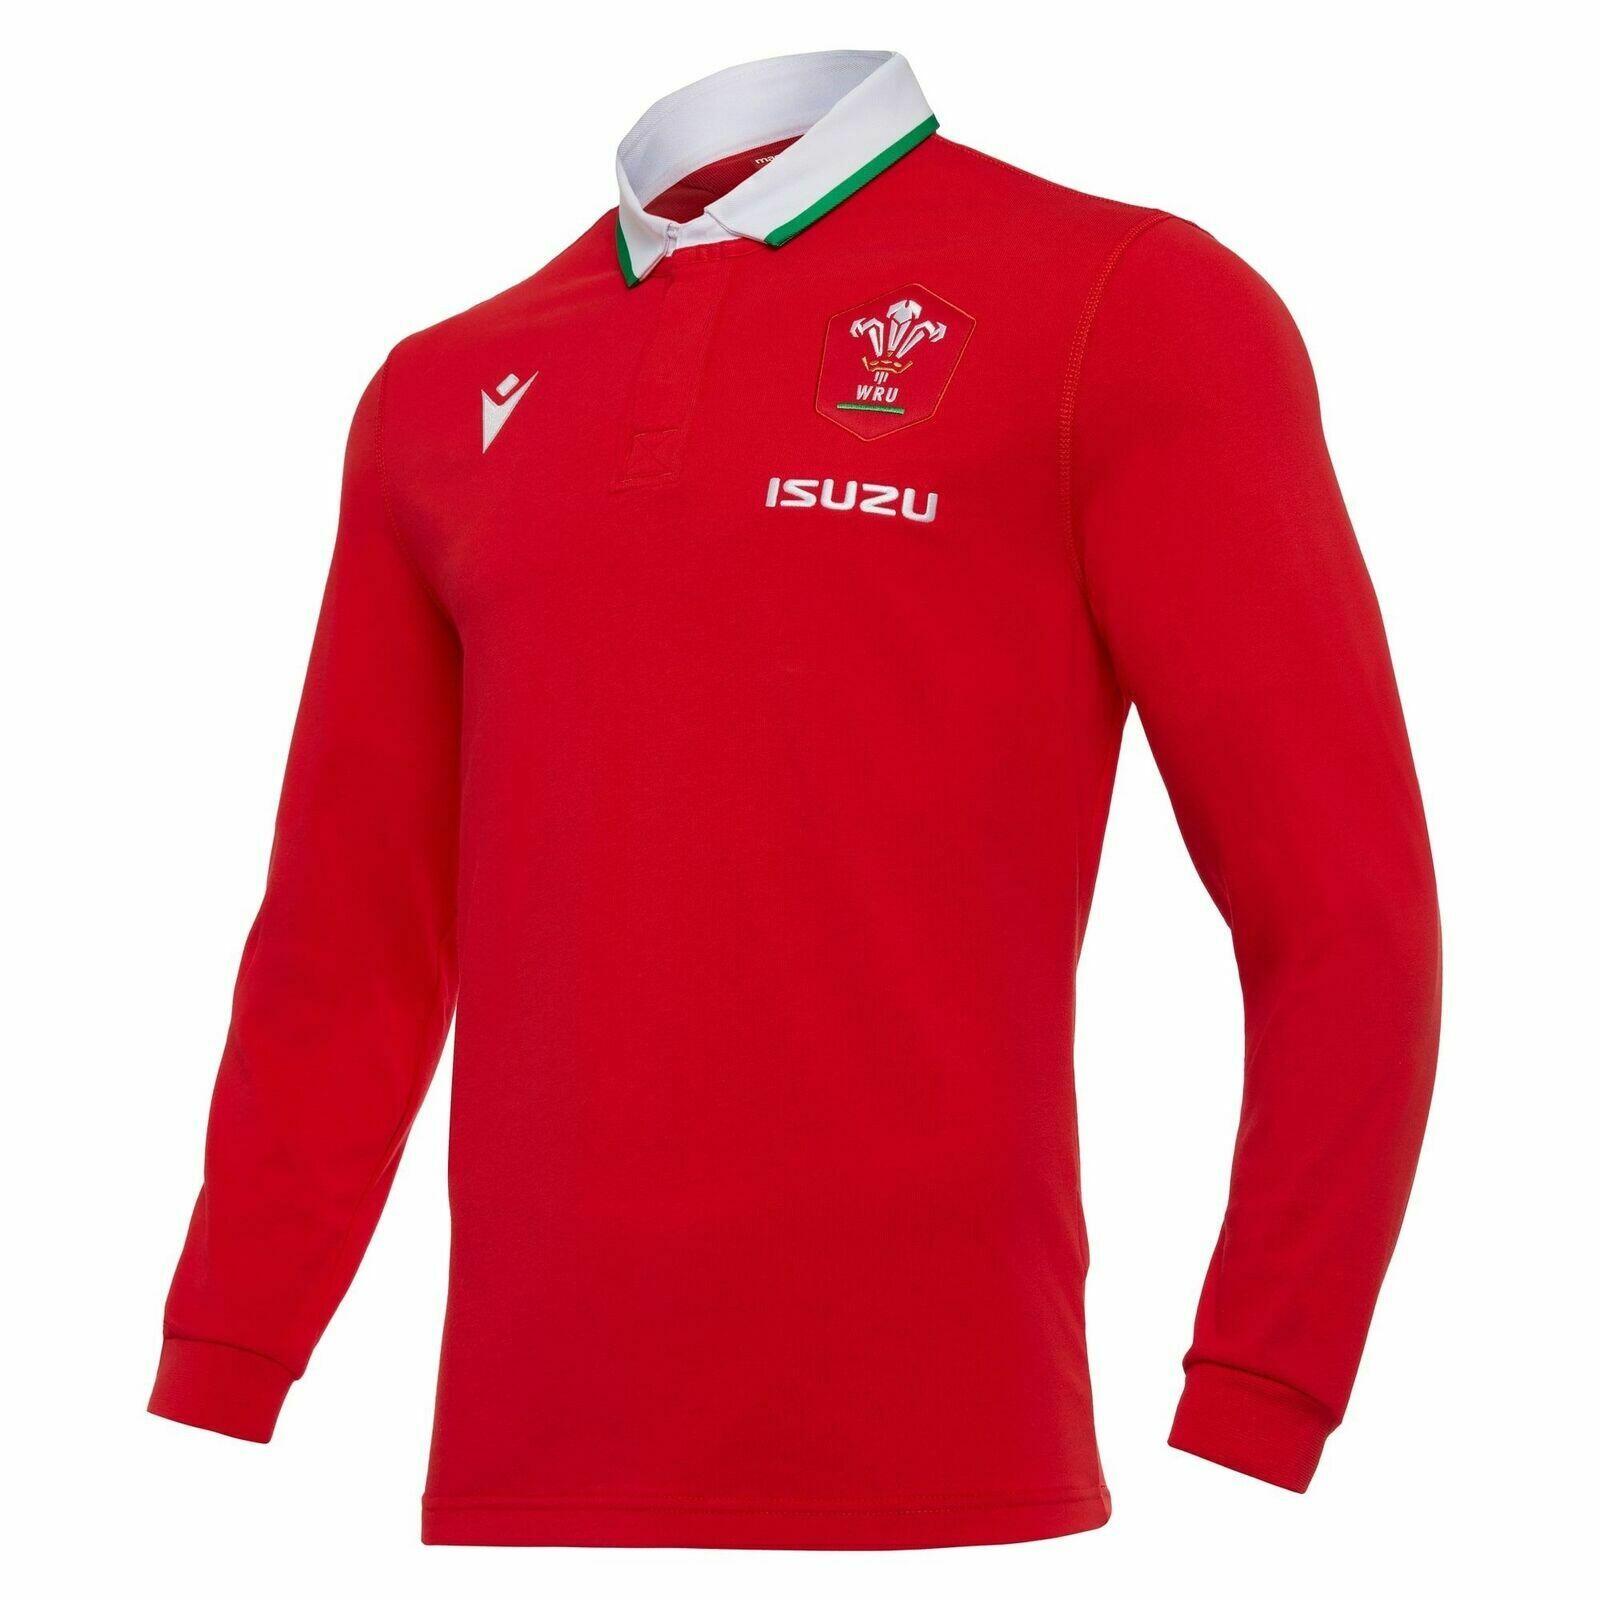 MACRON Macron Wales WRU Mens Home Cotton L/S Rugby Shirt 58125449 Red